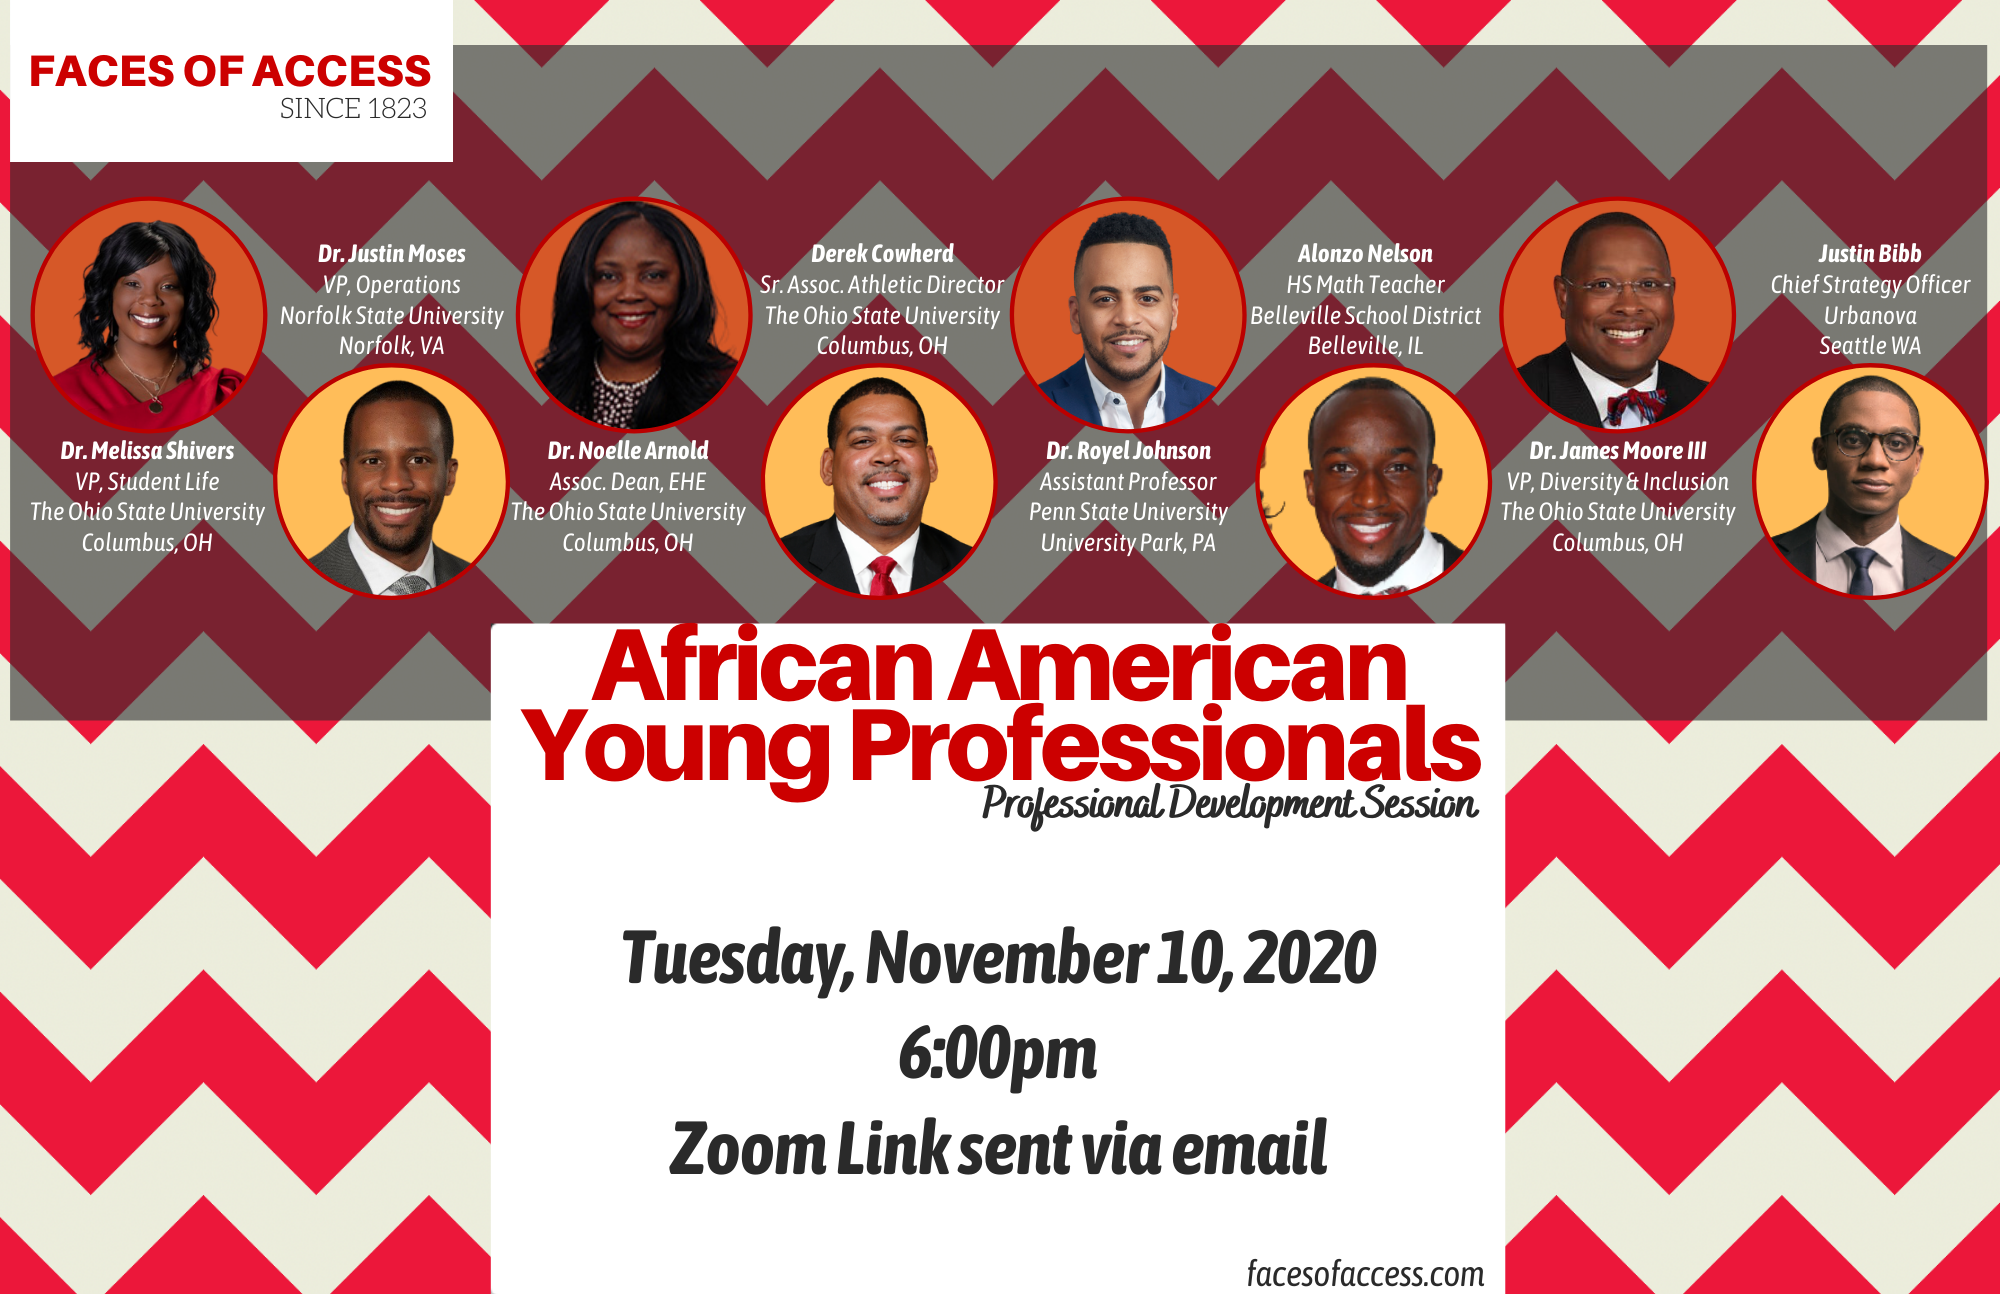  African American Young Professionals Professional Development Session featuring:   Dr. Melissa Shivers   ,    Alonzo Nelson   ,    Justin Bibb   ,    Dr. James Moore   ,    Dr. Noelle Arnold   ,    Dr. Justin Moses   ,    Dr. Royel Johnson   ,  and 